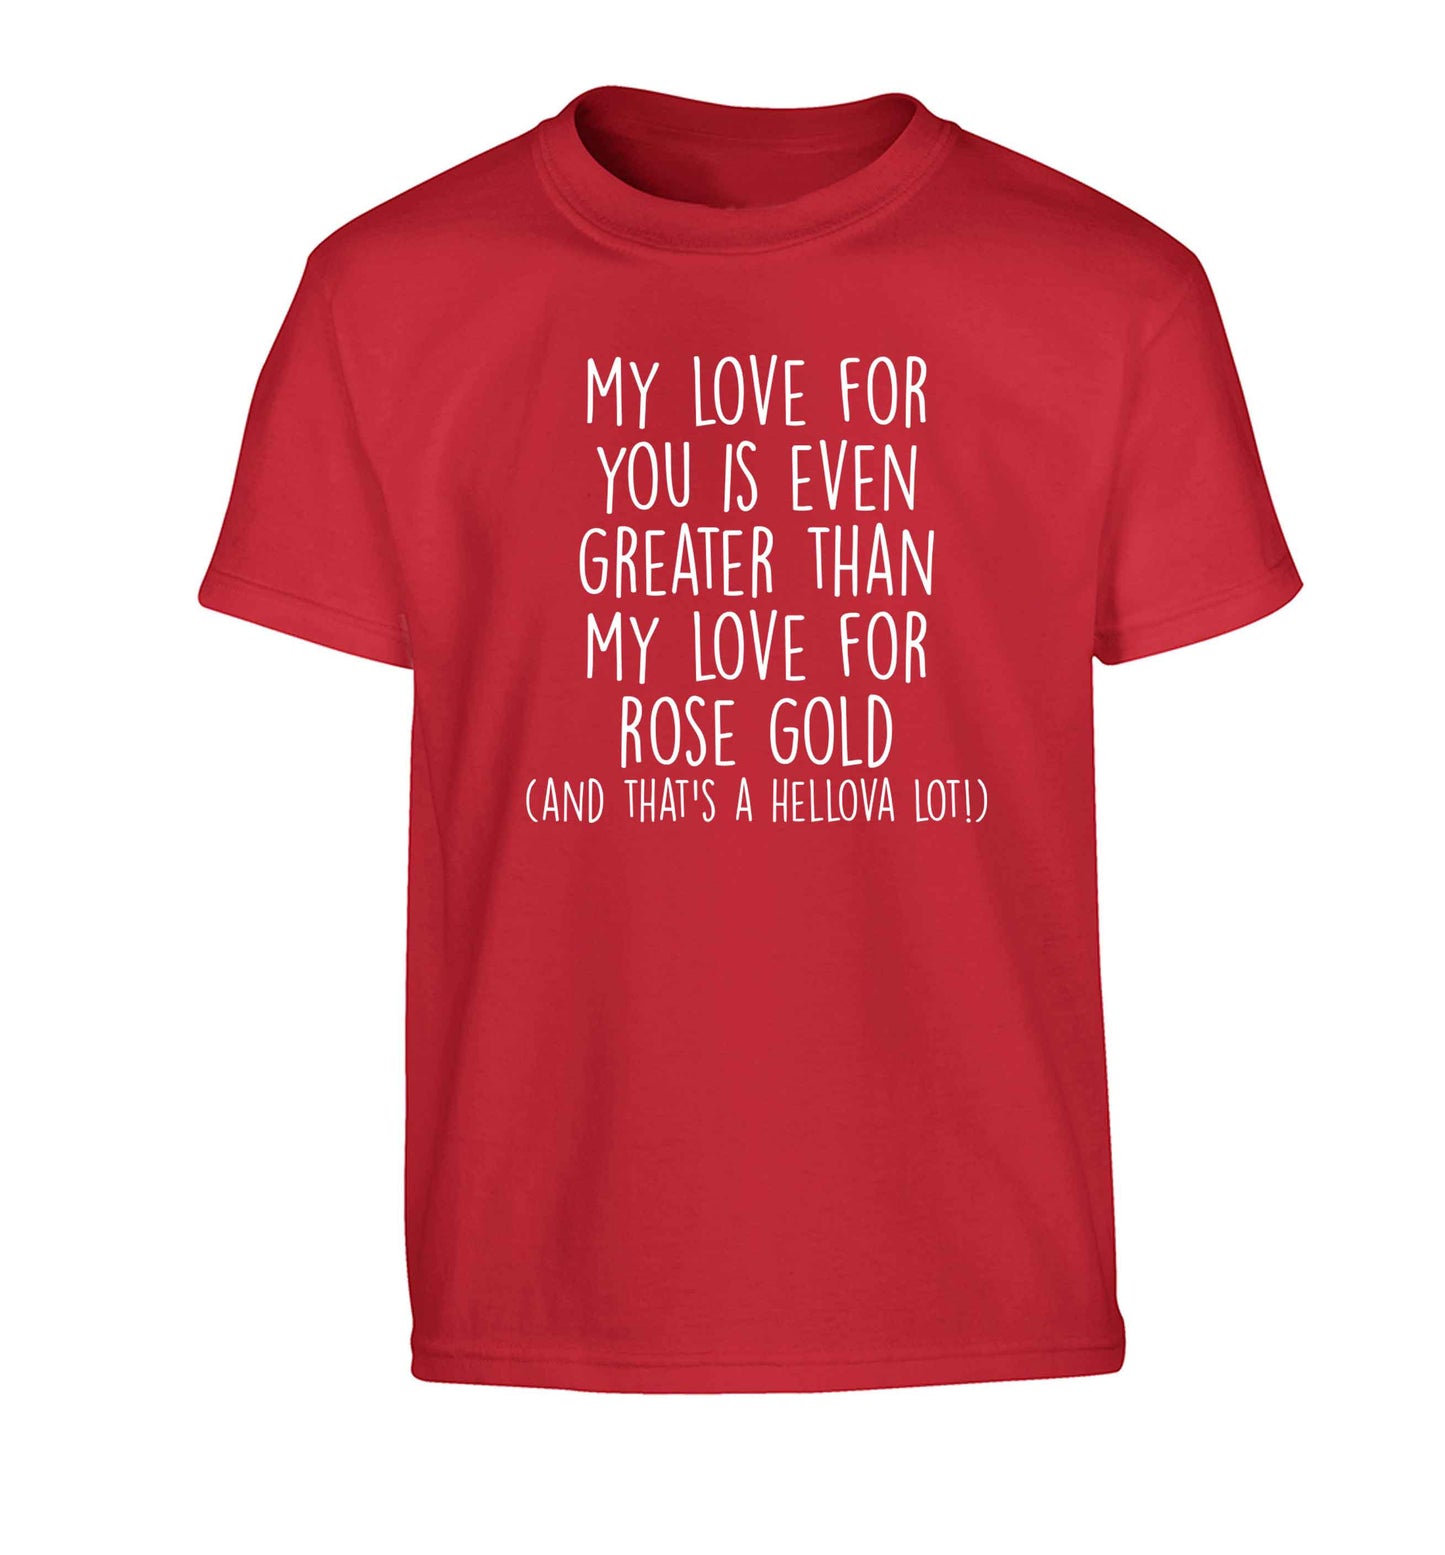 My love for you is even greater than my love for rose gold (and that's a hellova lot) Children's red Tshirt 12-13 Years